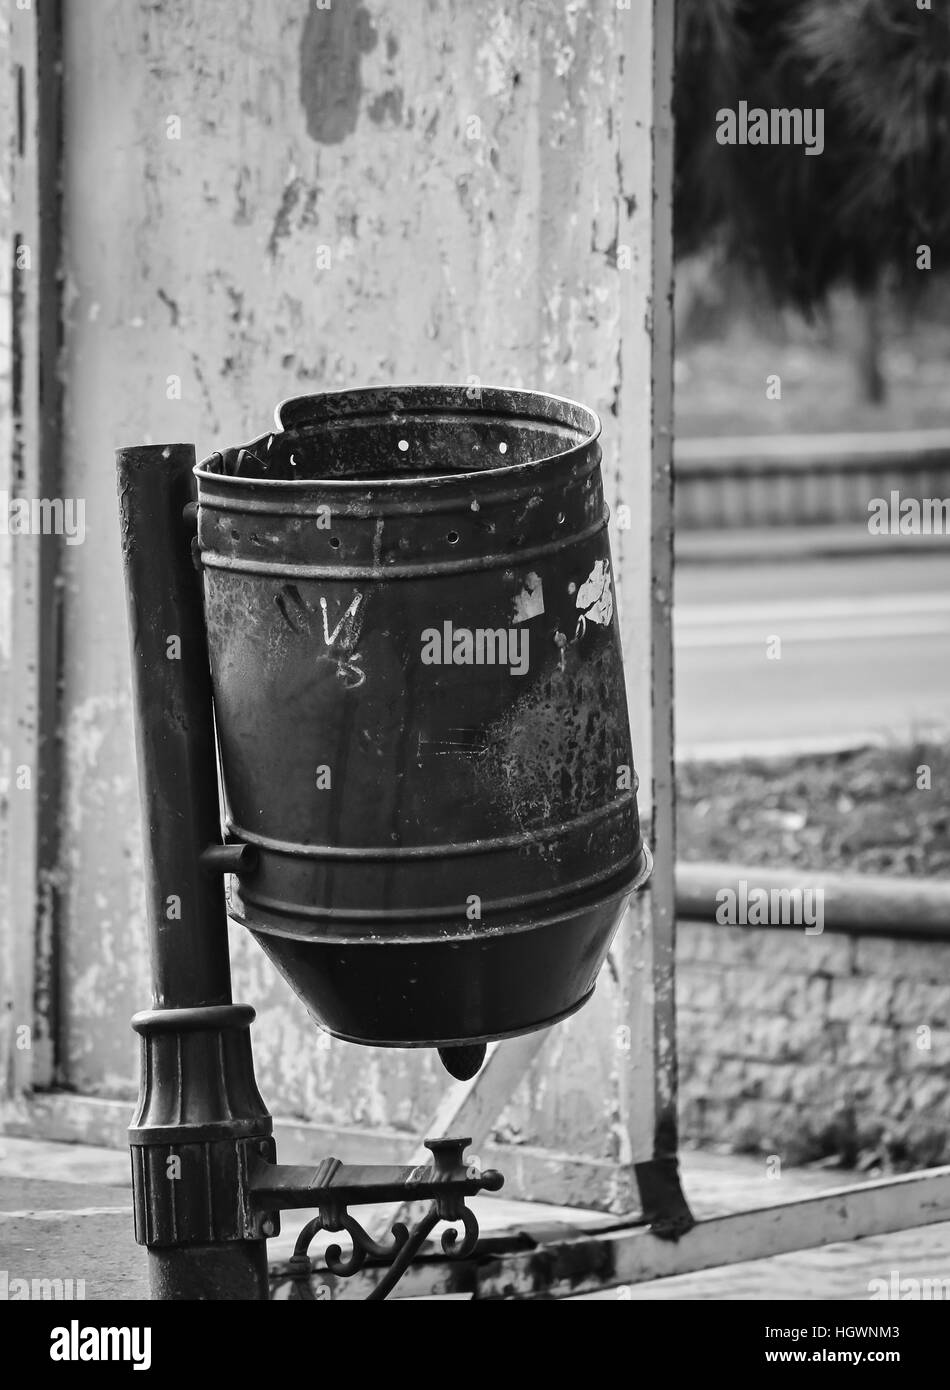 https://c8.alamy.com/comp/HGWNM3/metal-trash-can-on-the-street-in-black-and-white-colors-HGWNM3.jpg